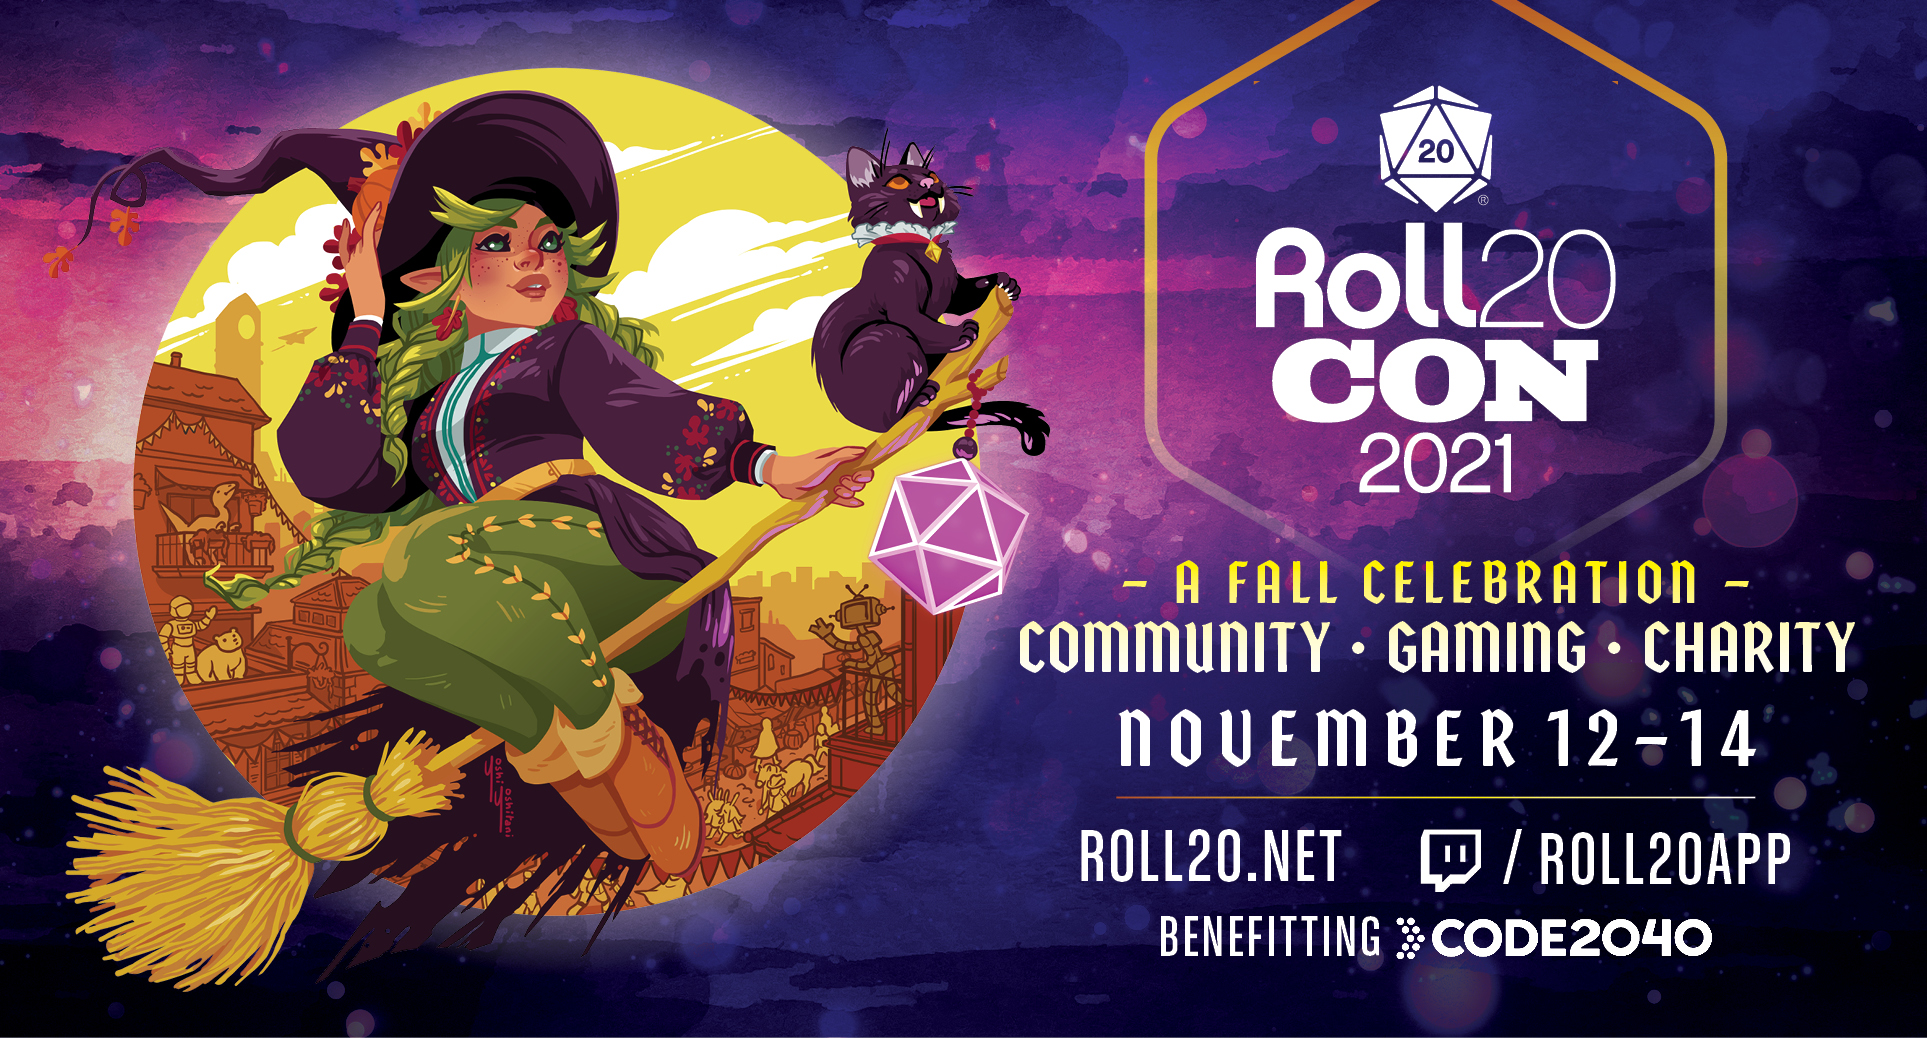 Go to Roll20Con 2021 Blog Post(Oct. 8th)